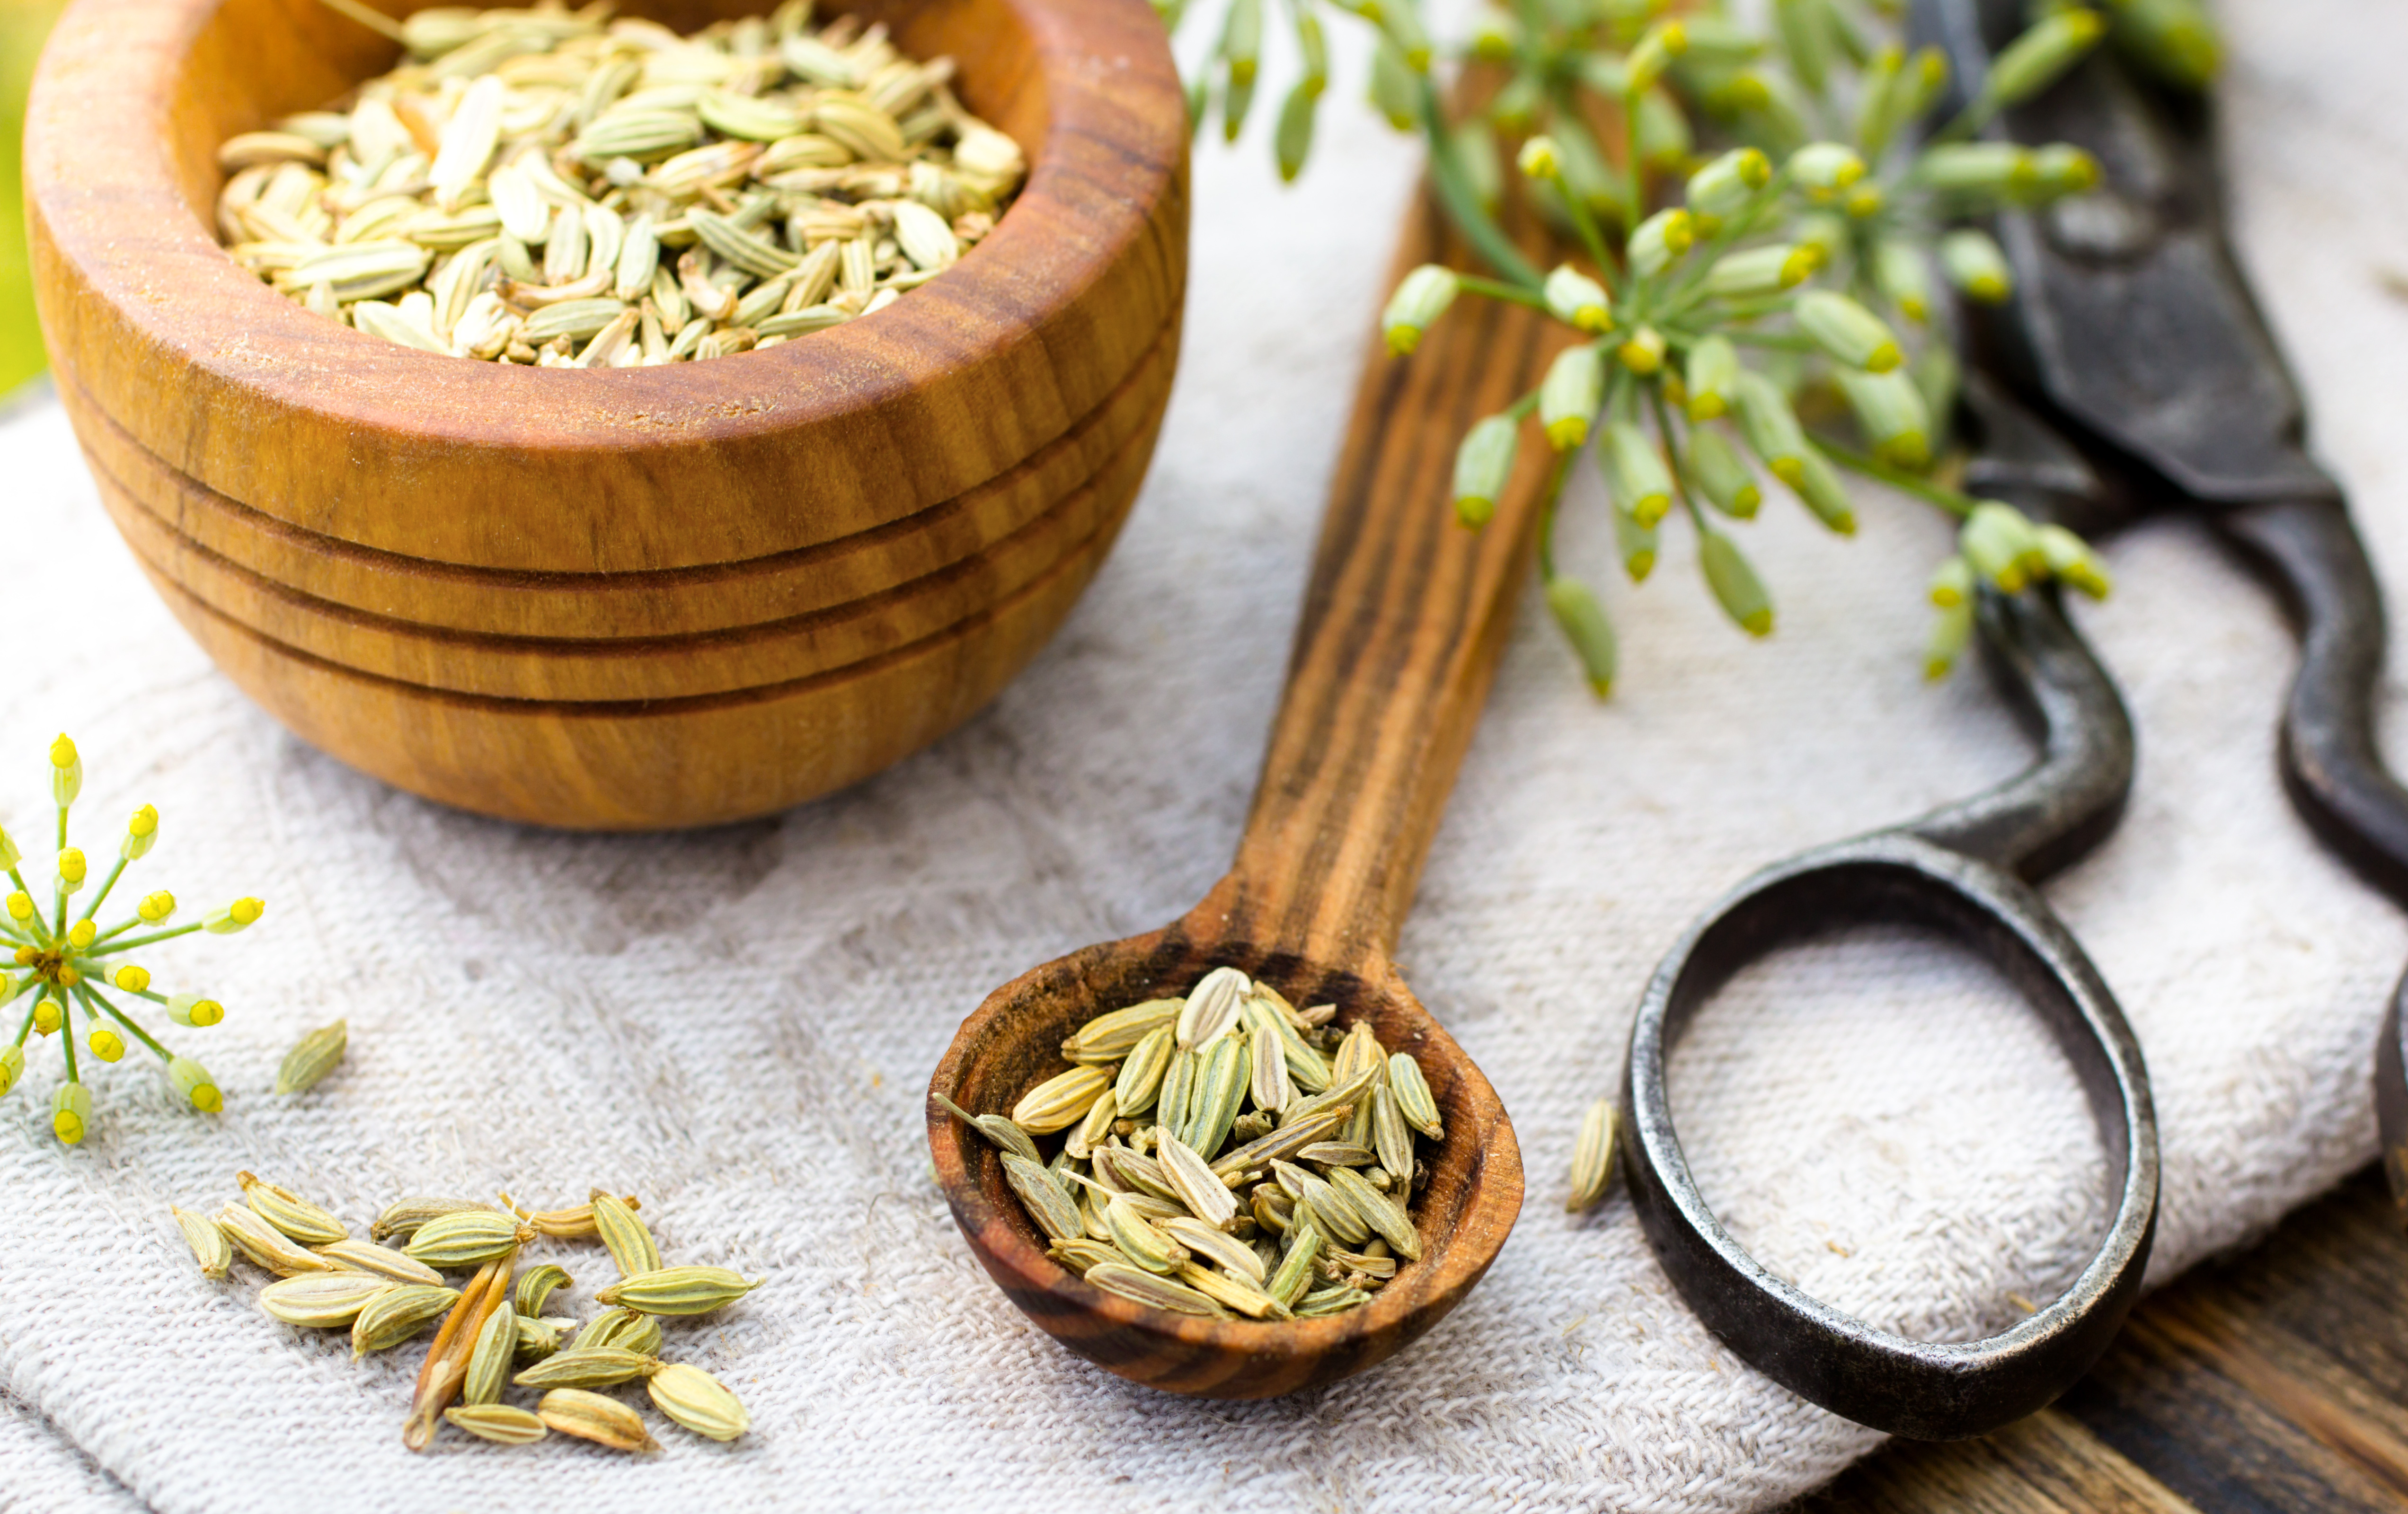 Fennel can help ease the symptoms of menopause from hot flashes to insomnia.